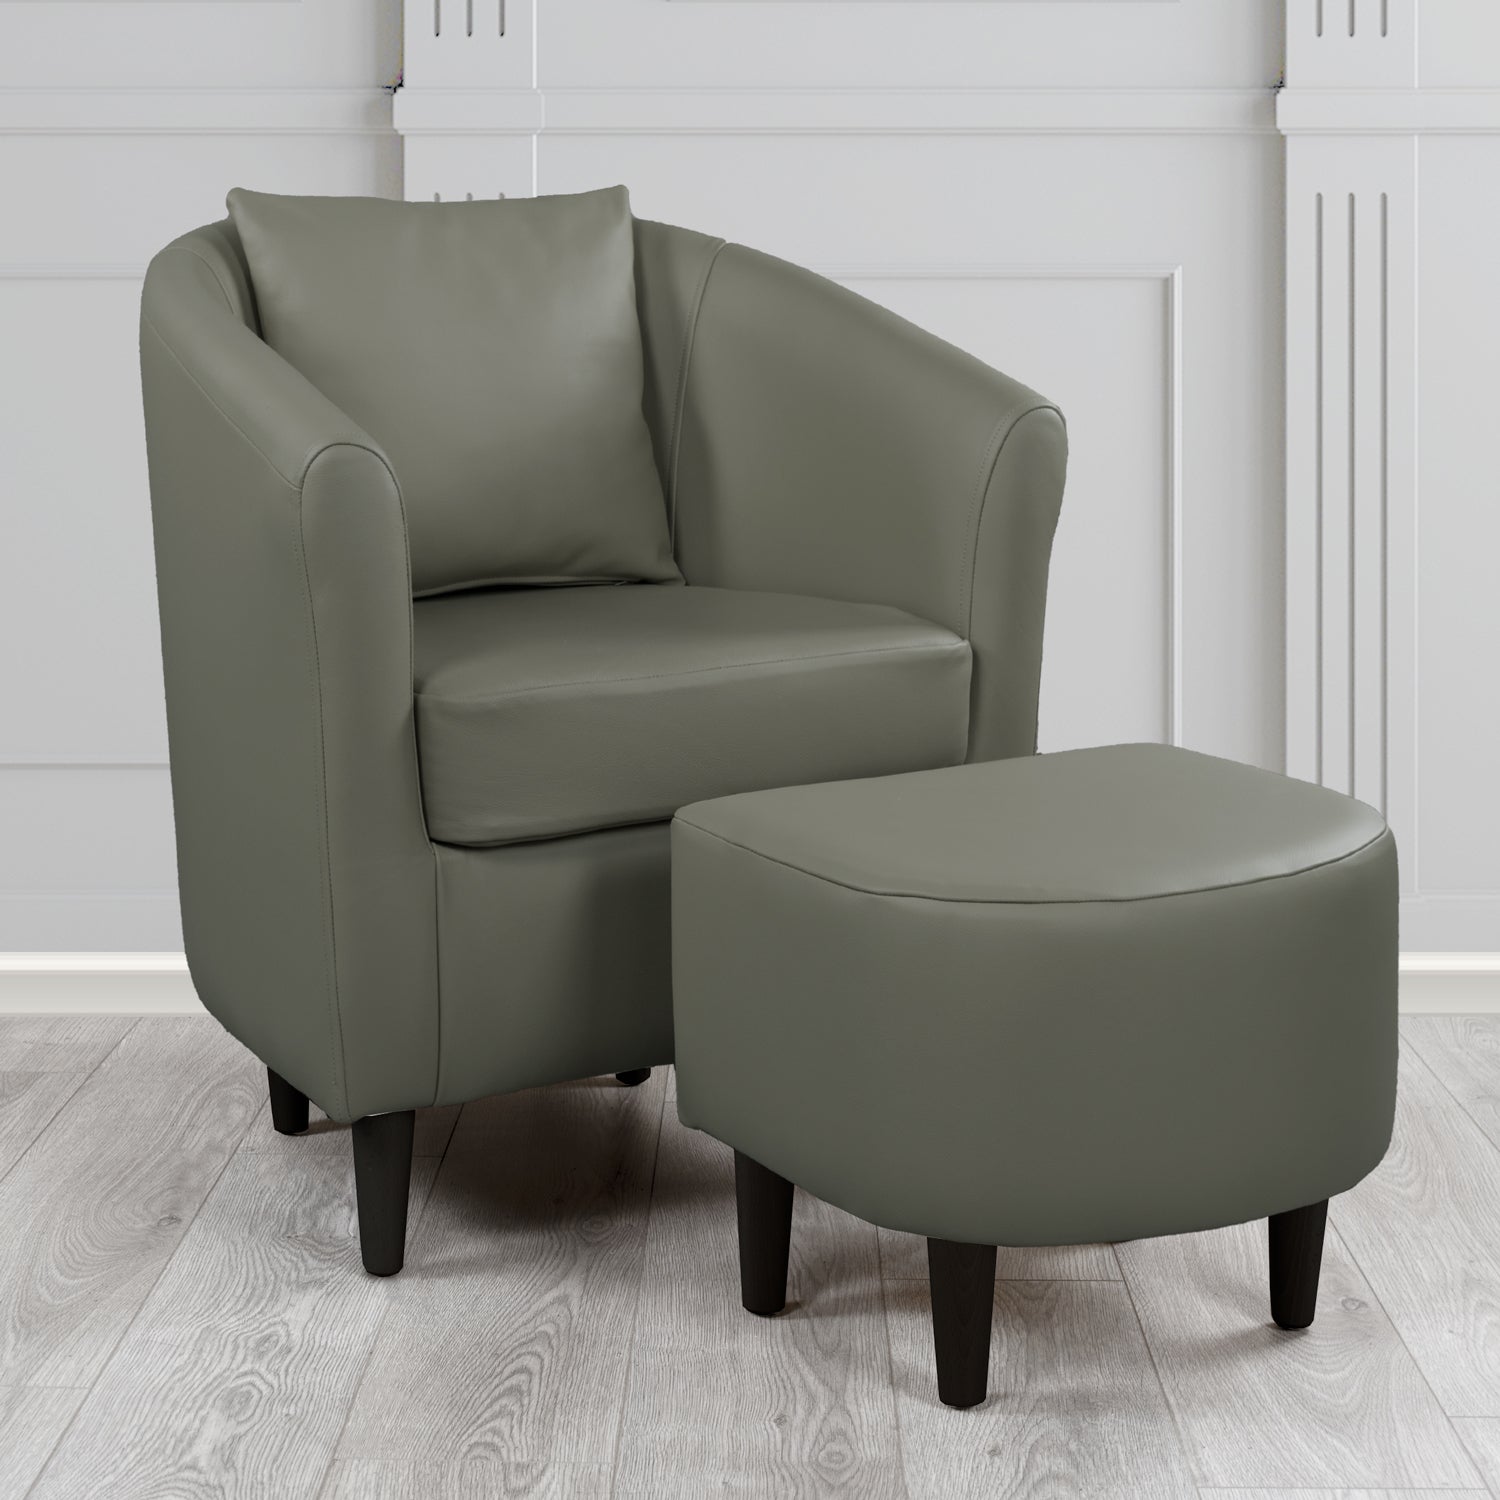 St Tropez Shelly Steel Crib 5 Genuine Leather Tub Chair & Footstool Set With Scatter Cushion (6619538653226)